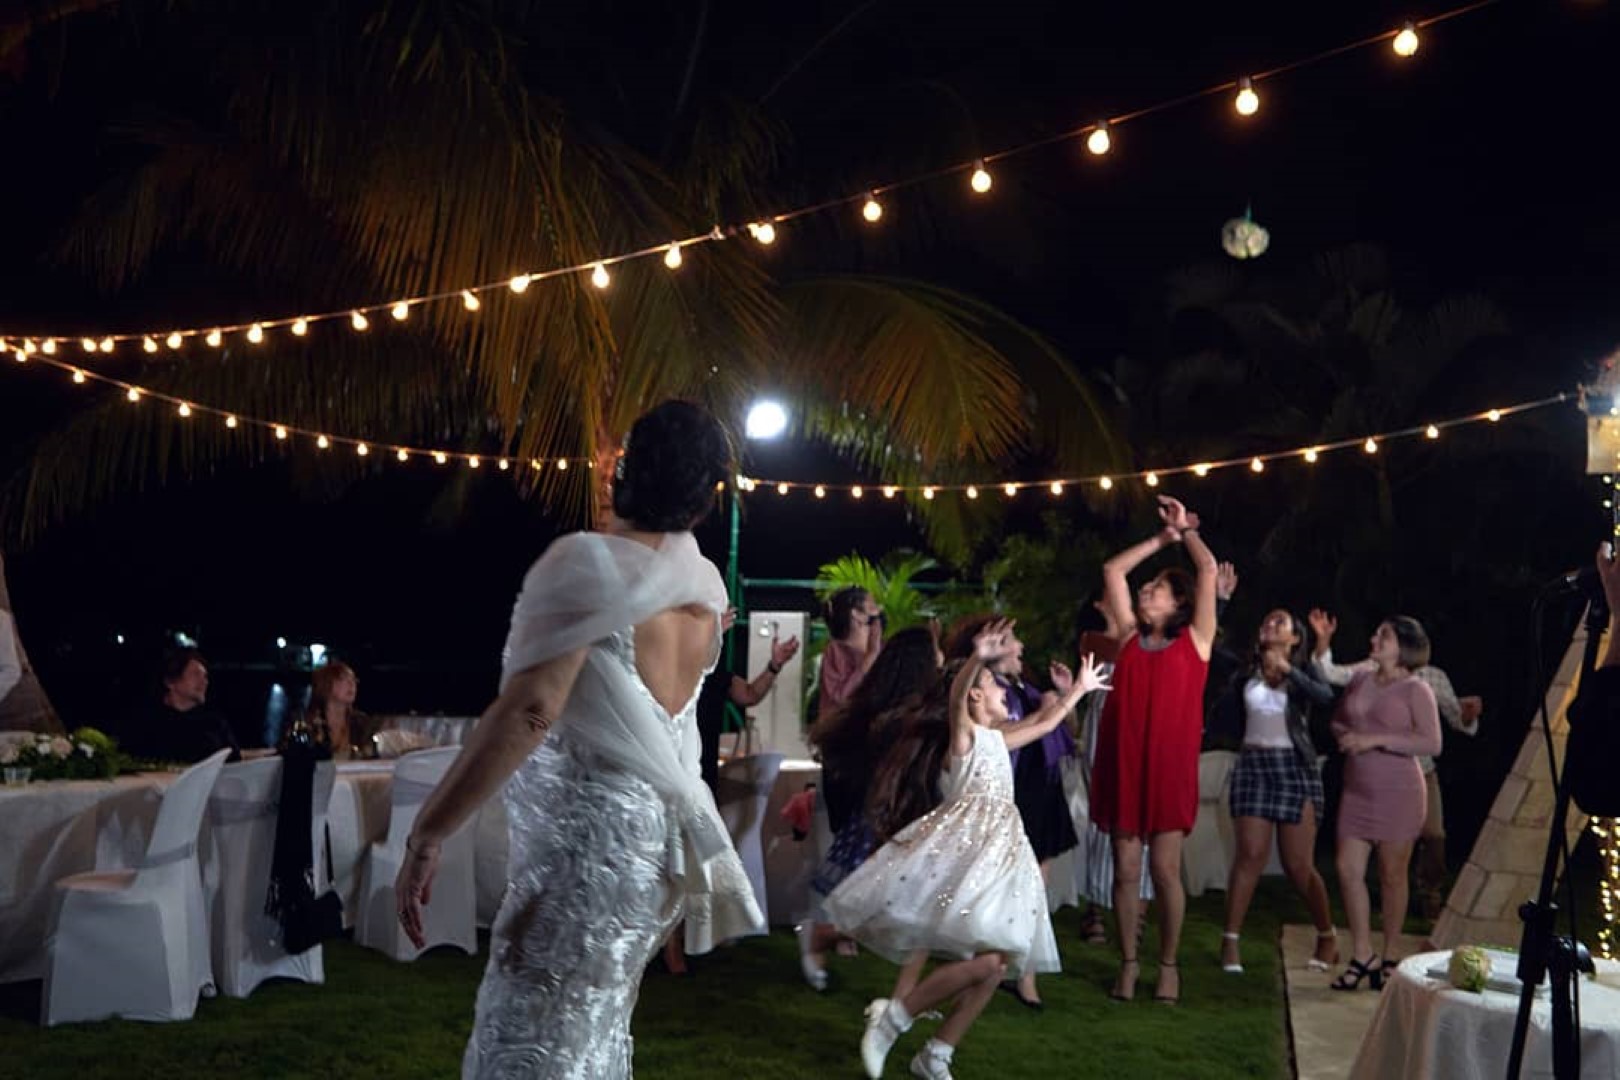 The Bouquet Toss Tradition in Cuban Weddings